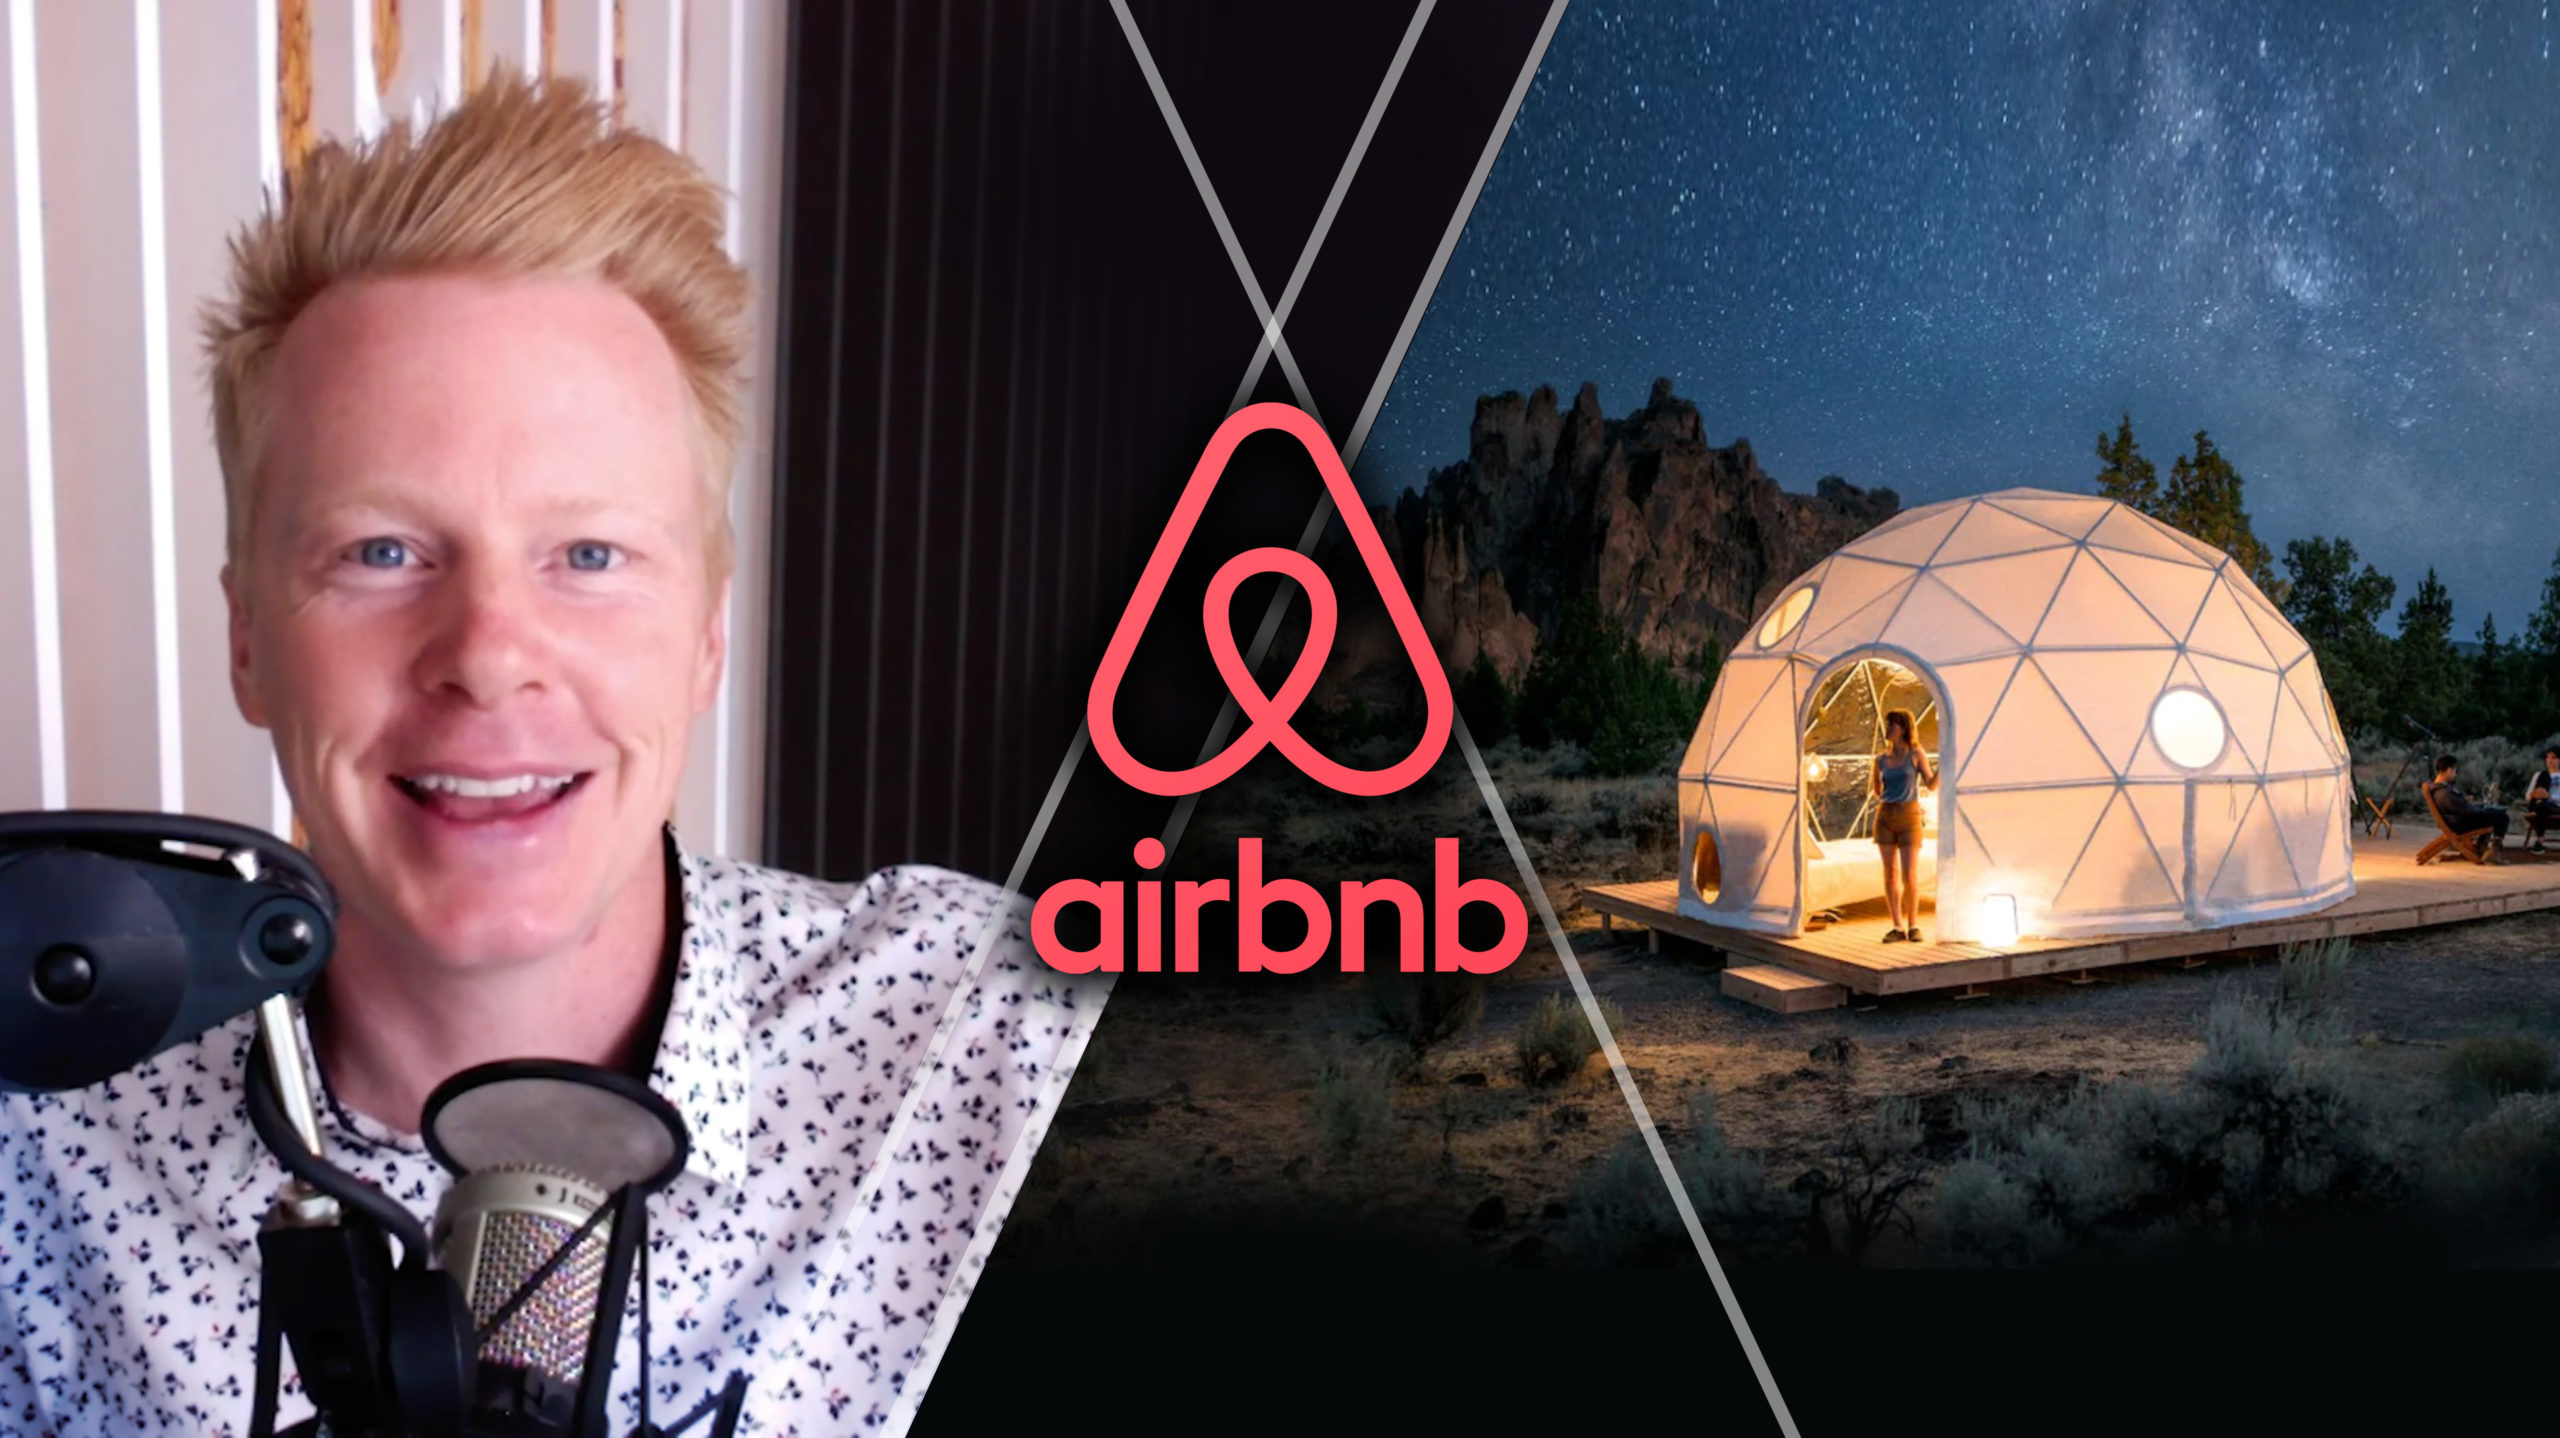 What does the Airbnb logo stand for? What does it mean?